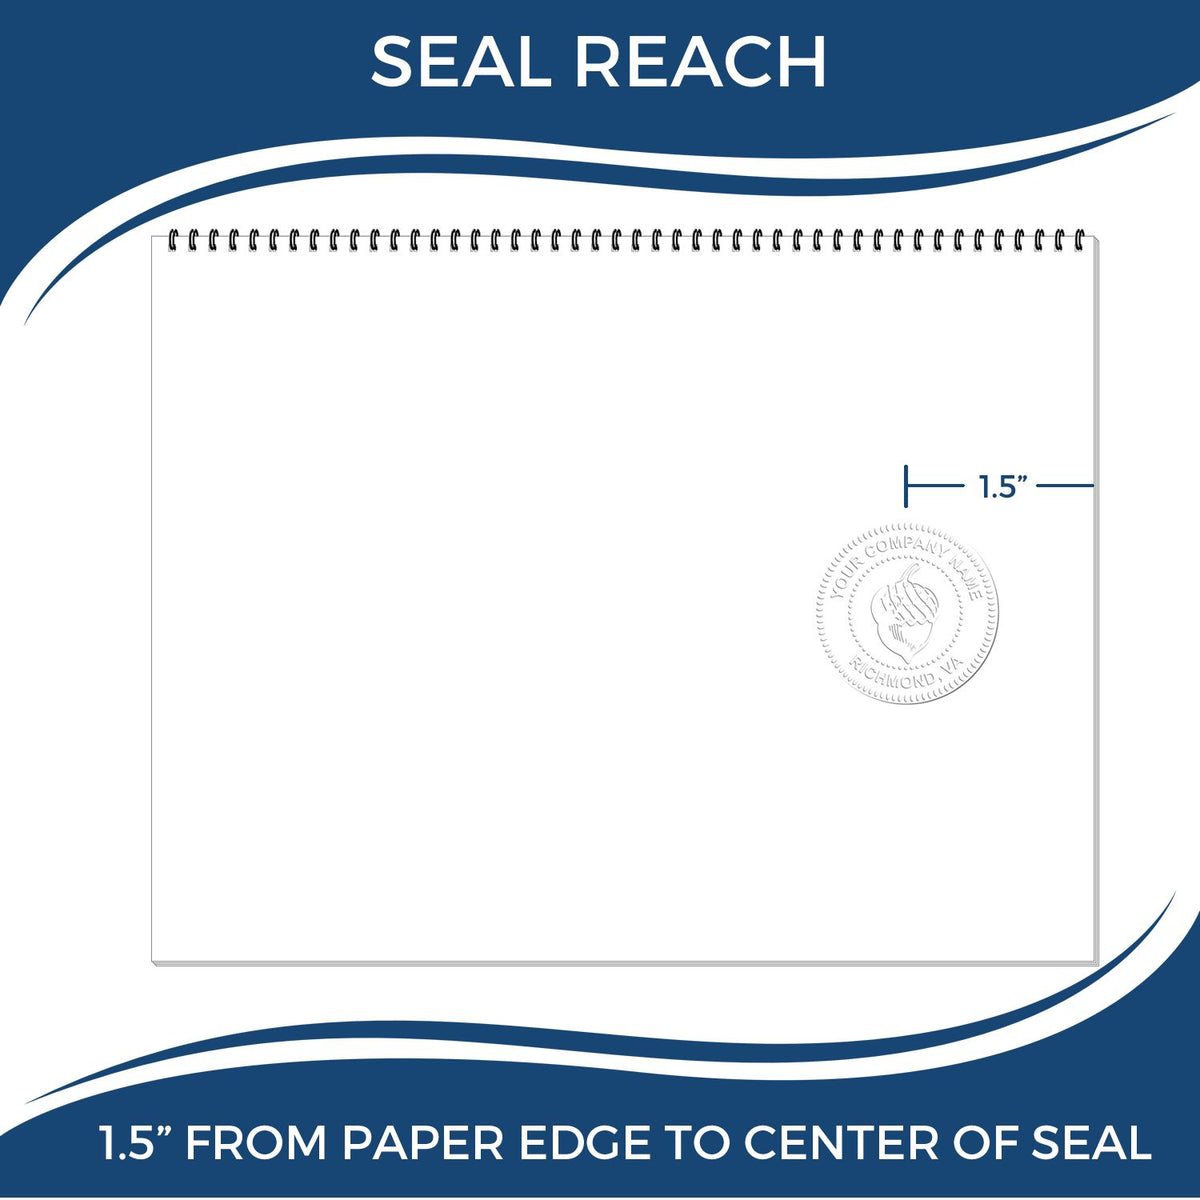 An infographic showing the seal reach which is represented by a ruler and a miniature seal image of the Alaska Desk Architect Embossing Seal